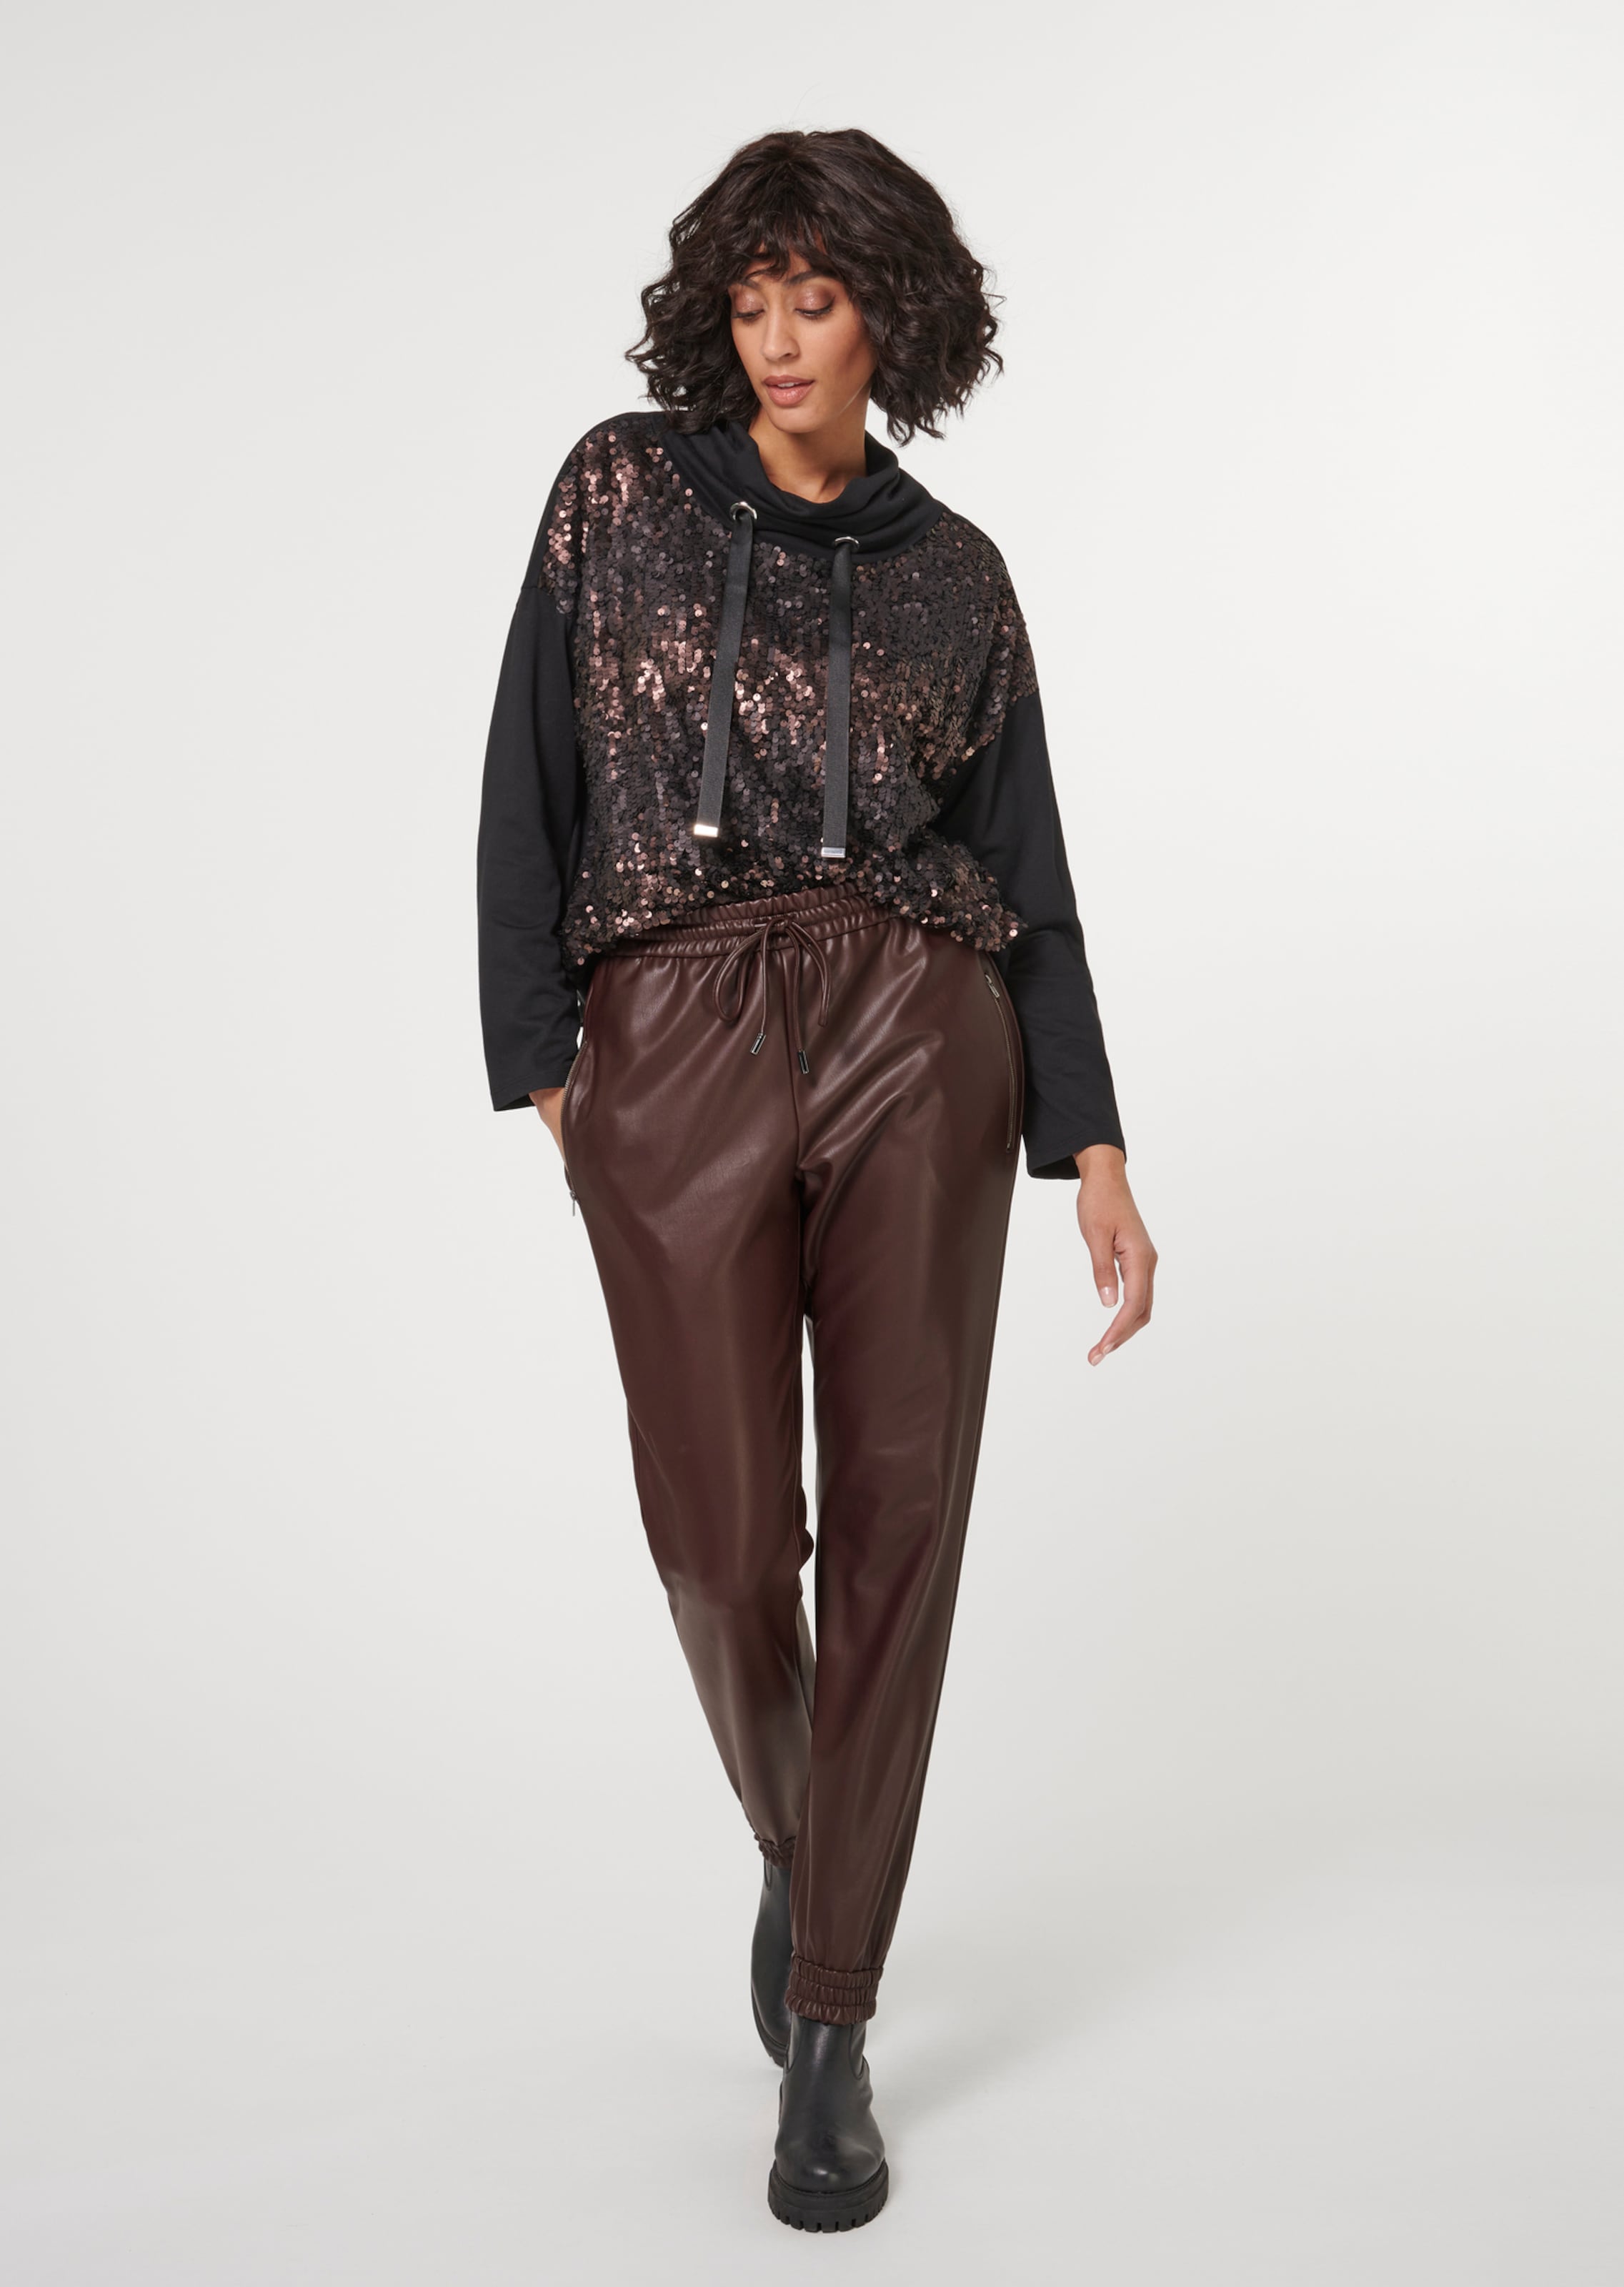 Adrales Leather Look Trousers | Montana Northallerton